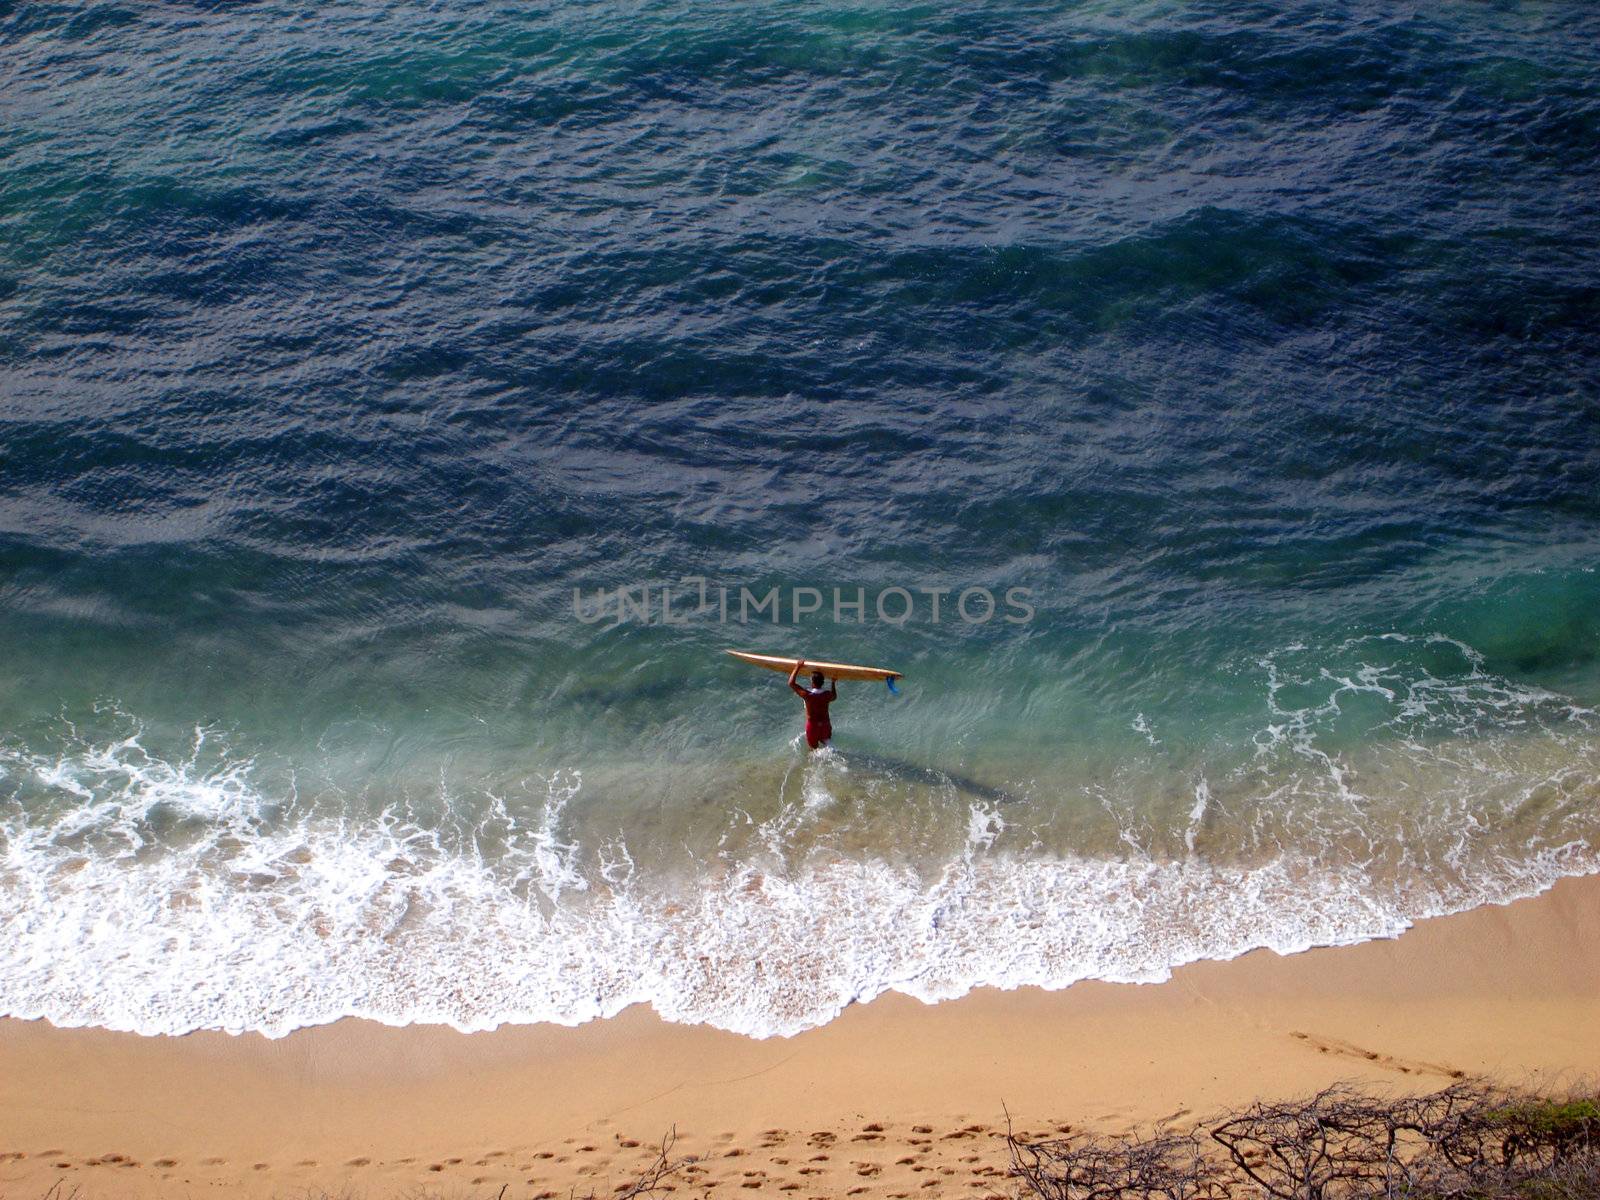 Aerial view of Surfer carrying surfboard into water, Diamond Head Beach, Hawaii